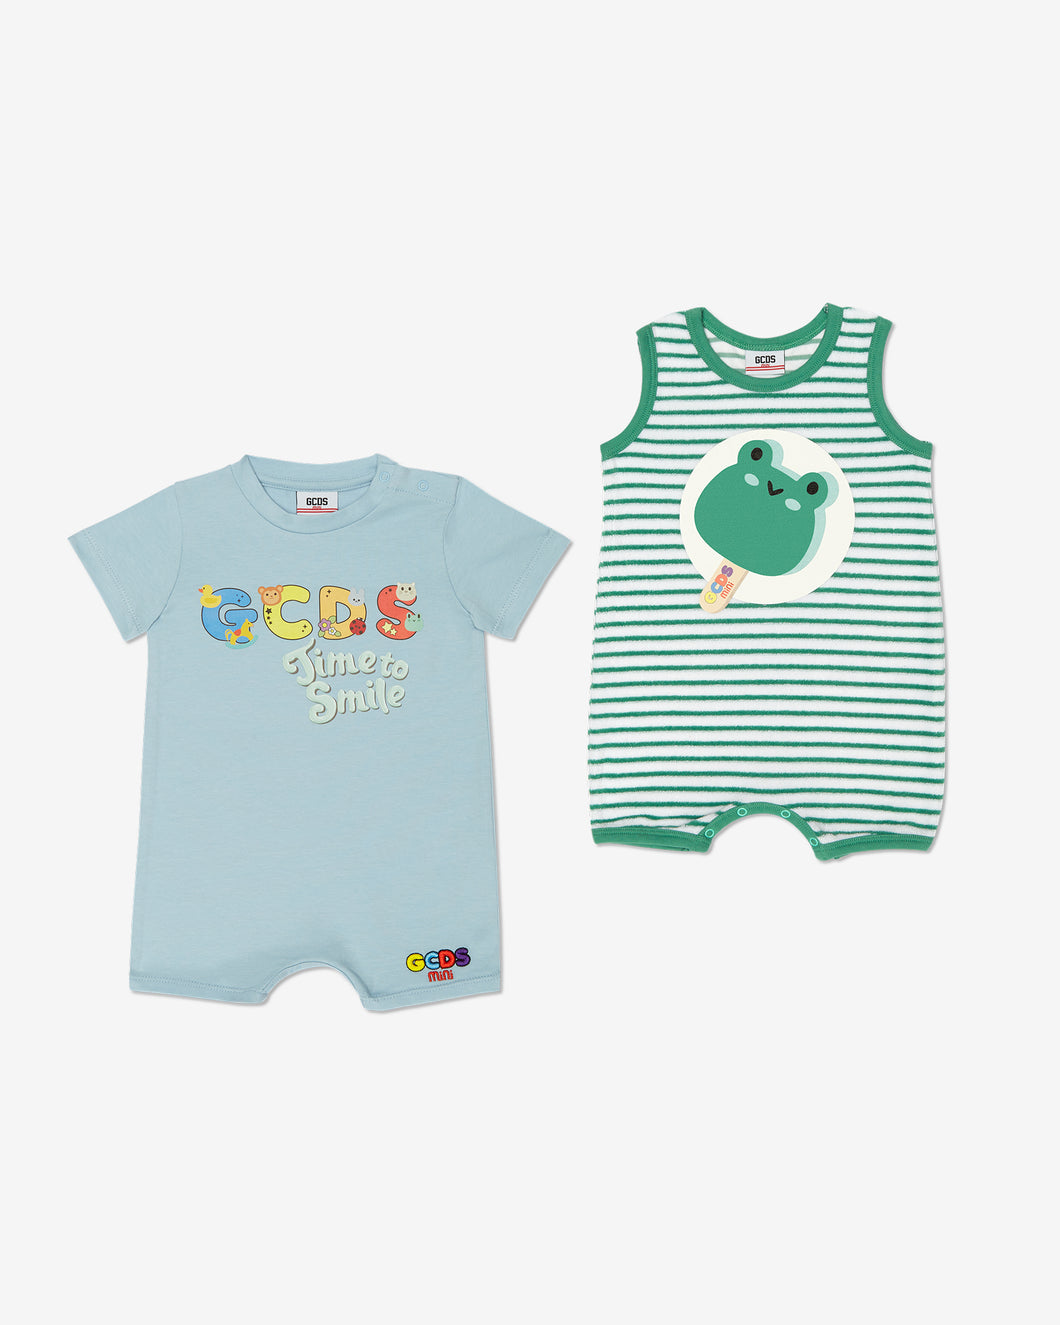 Gcds Frog Two-Piece Baby Romper Set: Boy Playsuits and Gift Set Light Blue | GCDS Spring/Summer 2023